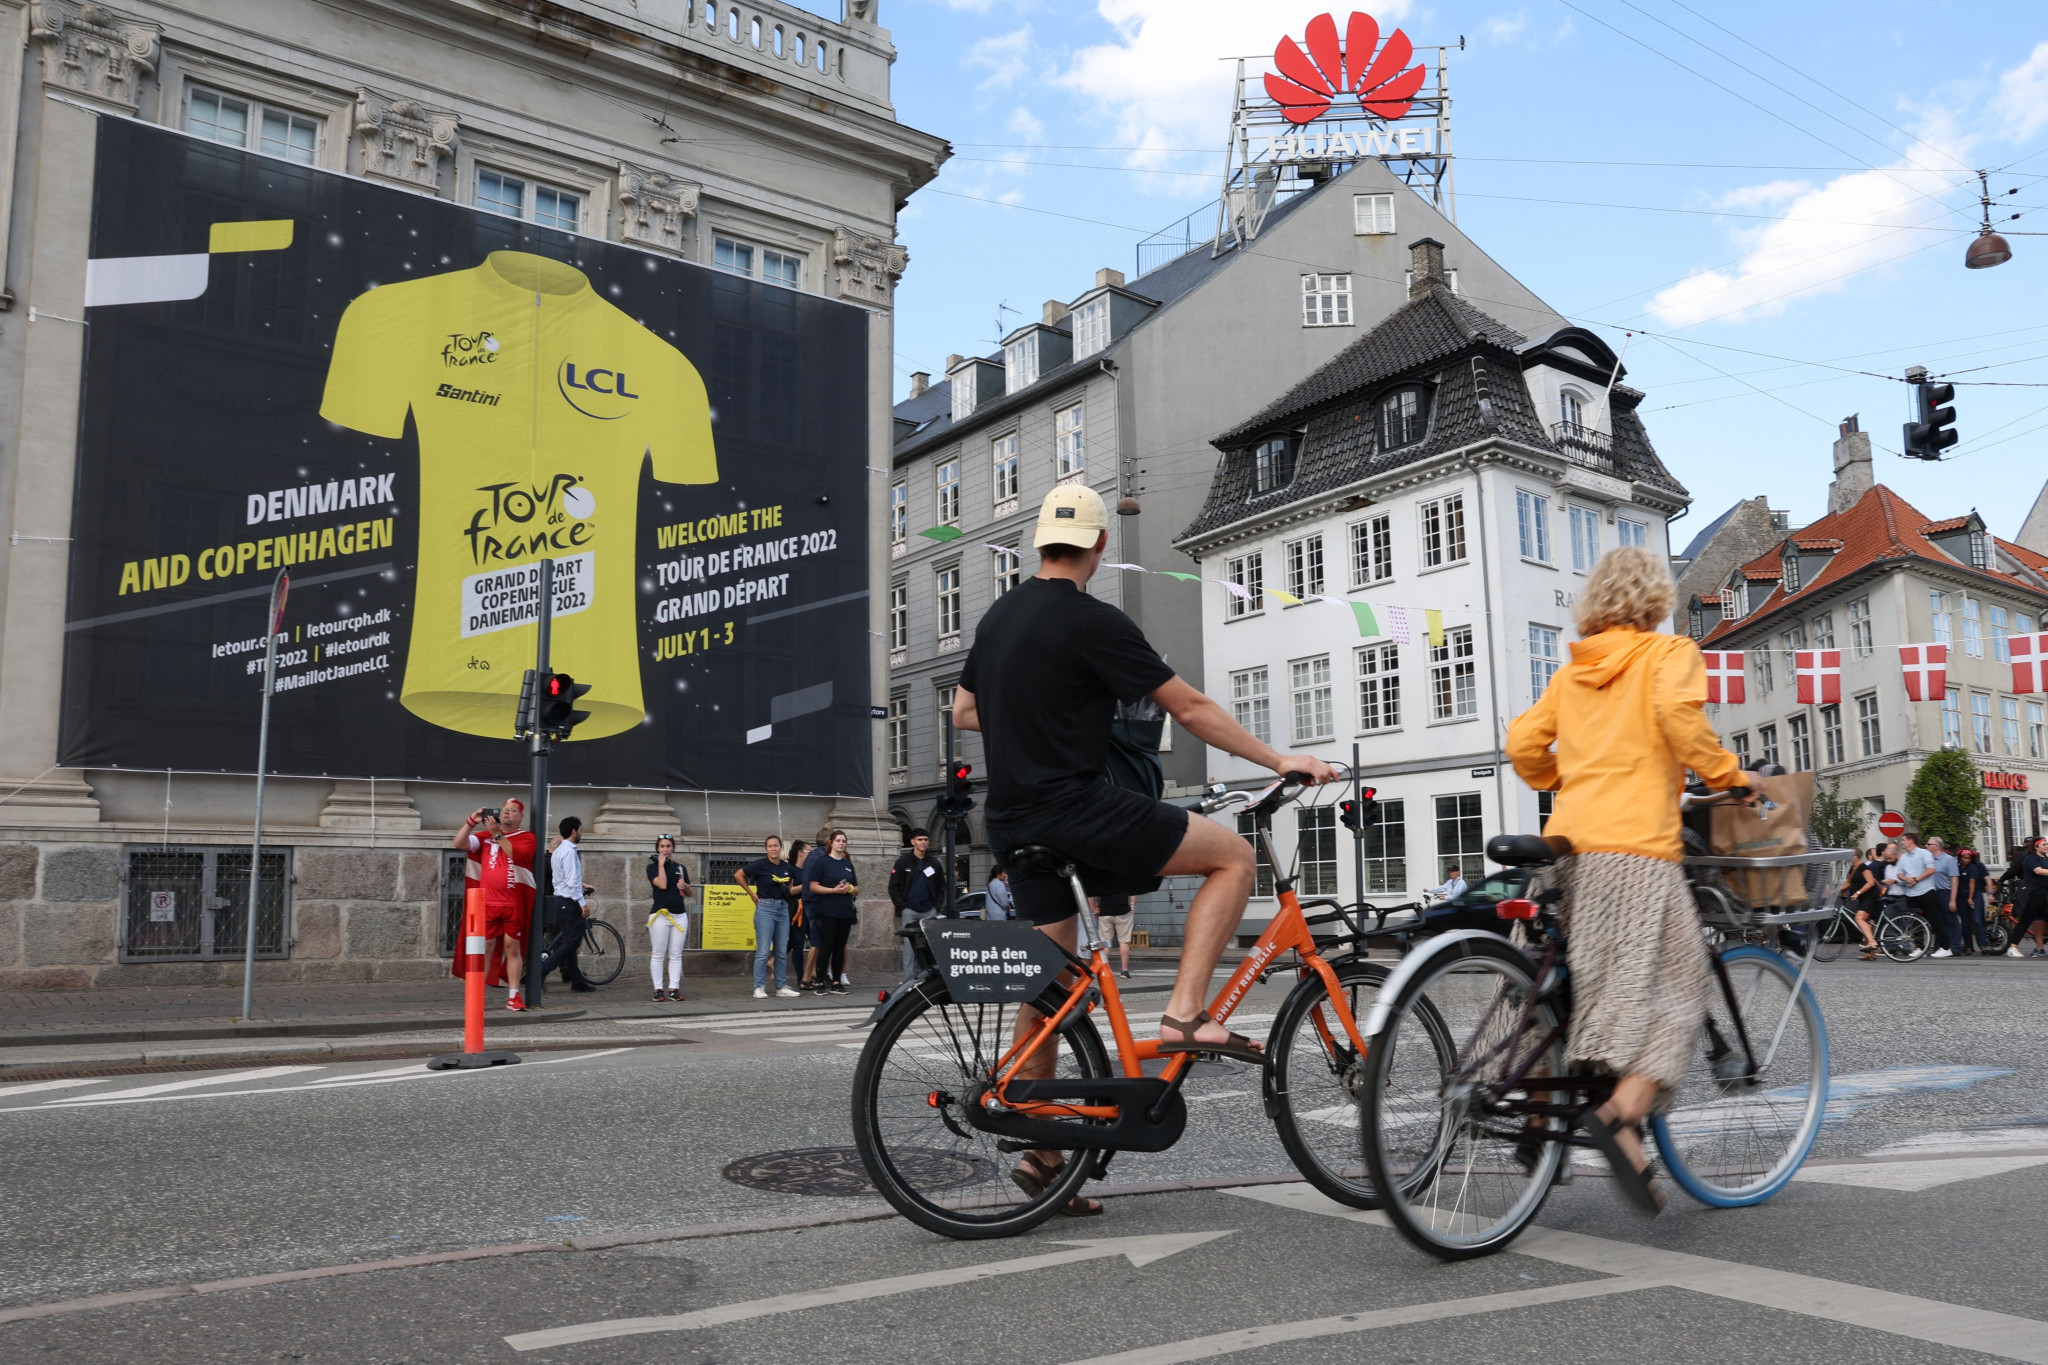 COVID-19 measures have been updated prior to the Grand Départ of the Tour de France ©Getty Images